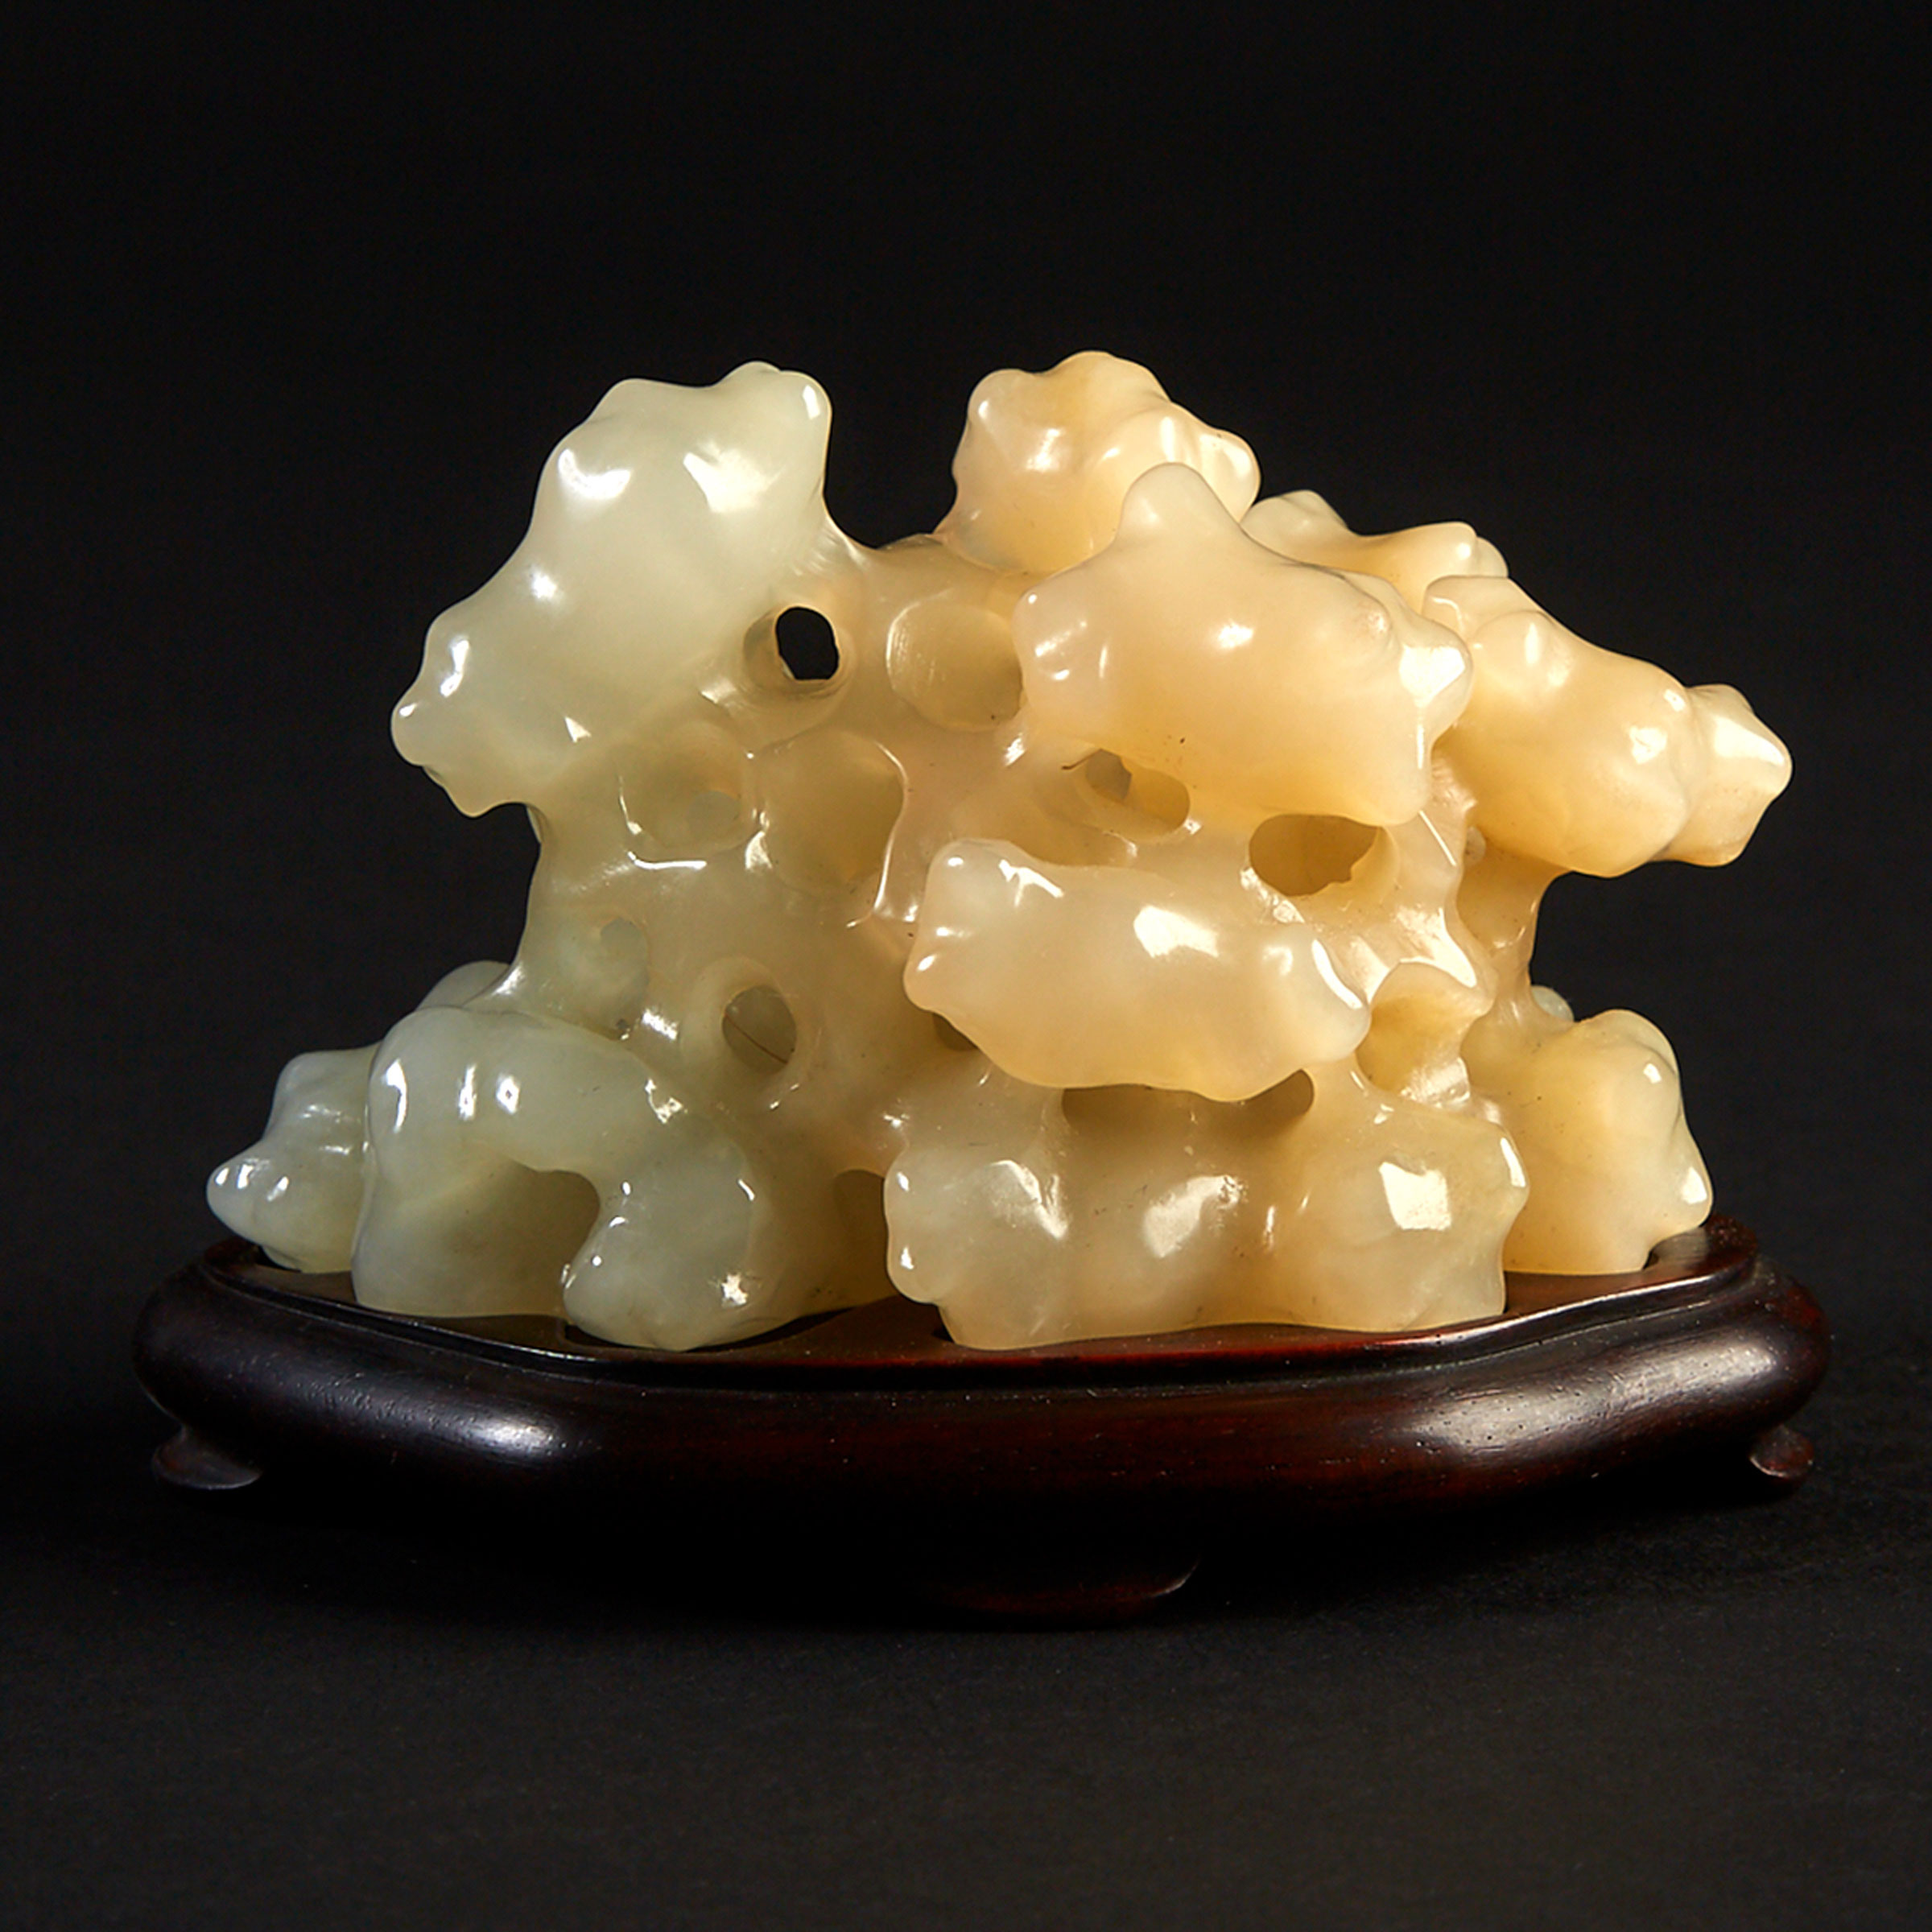 A Reticulated White Jade Carving